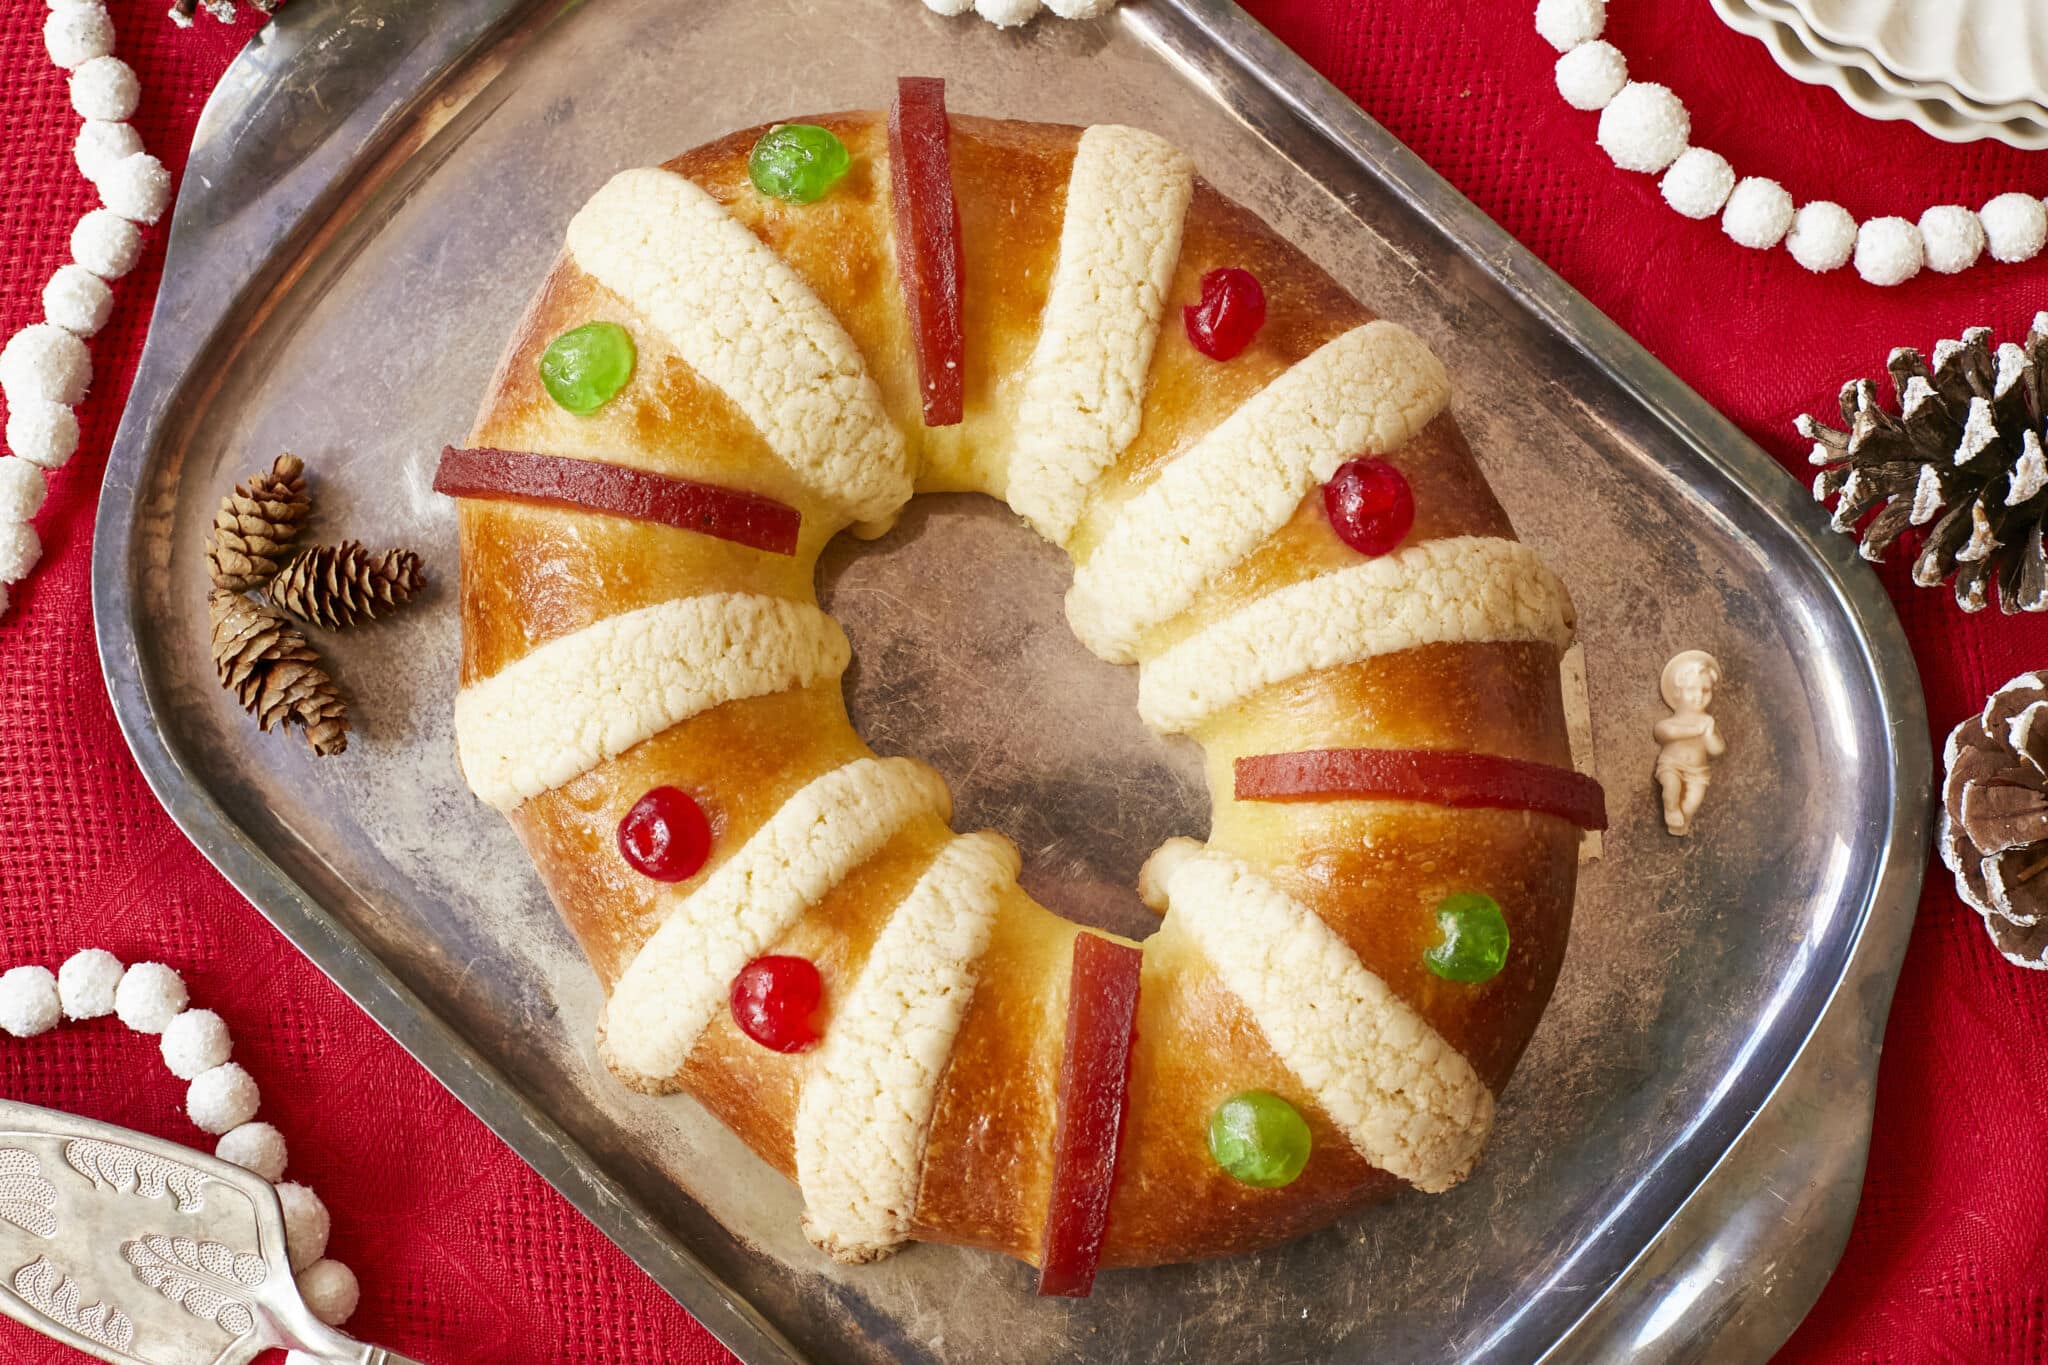 Rosca de Reyes (Three Kings Bread)is baked until golden brown. It's infused with orange zest and decorated with festive candied cherries, strips of quince paste, and sugar paste. A baby Jesus figurine is inserted into the bread after baking,